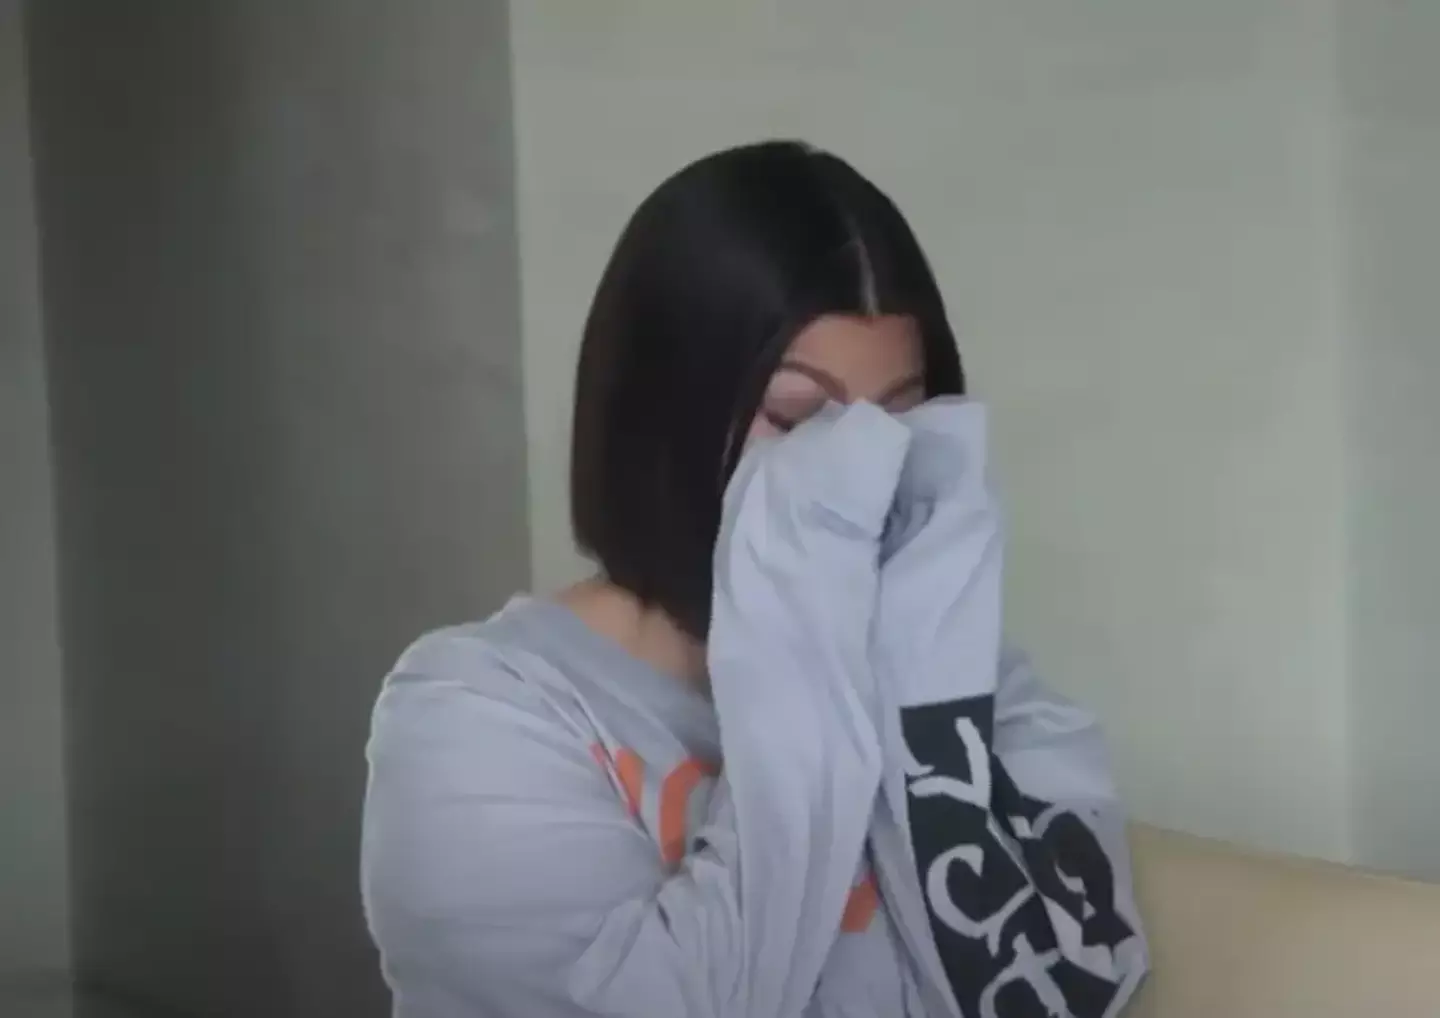 Kourtney was left in tears over Kim's fashion collab.